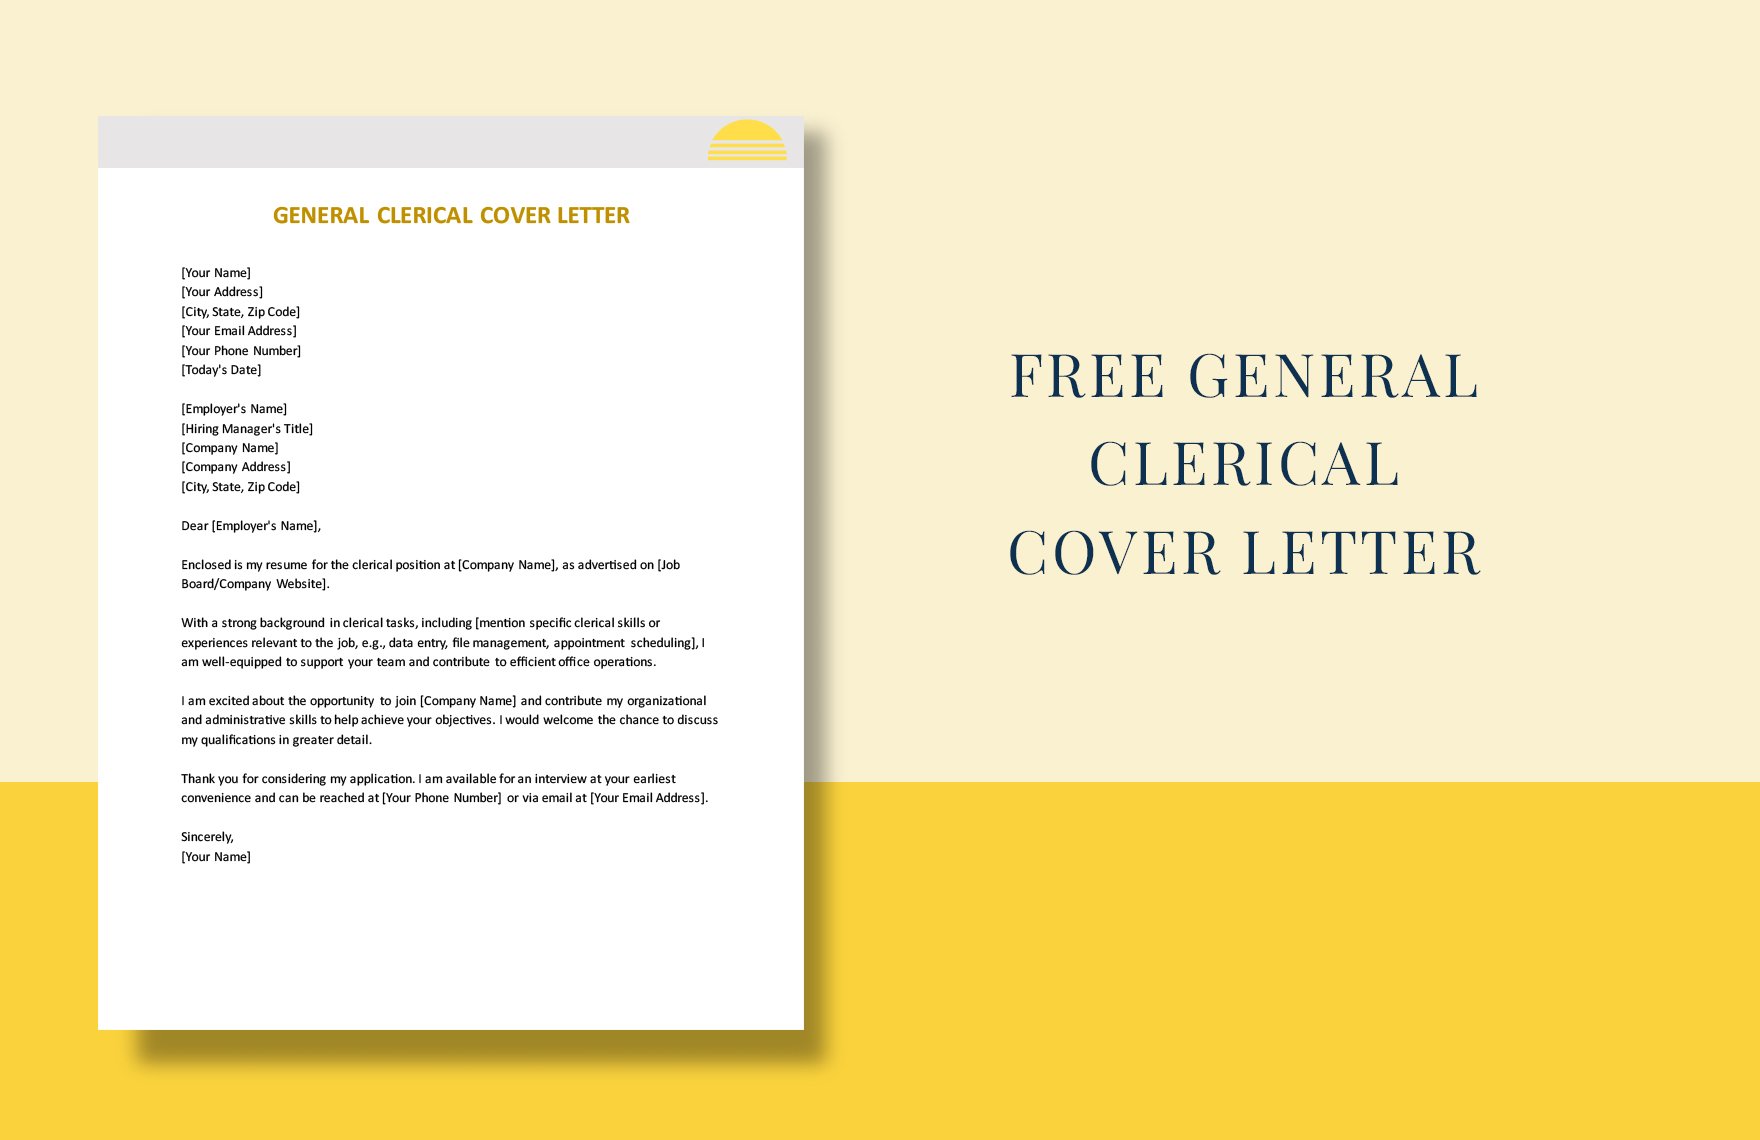 General Clerical Cover Letter in Word, Google Docs, PDF